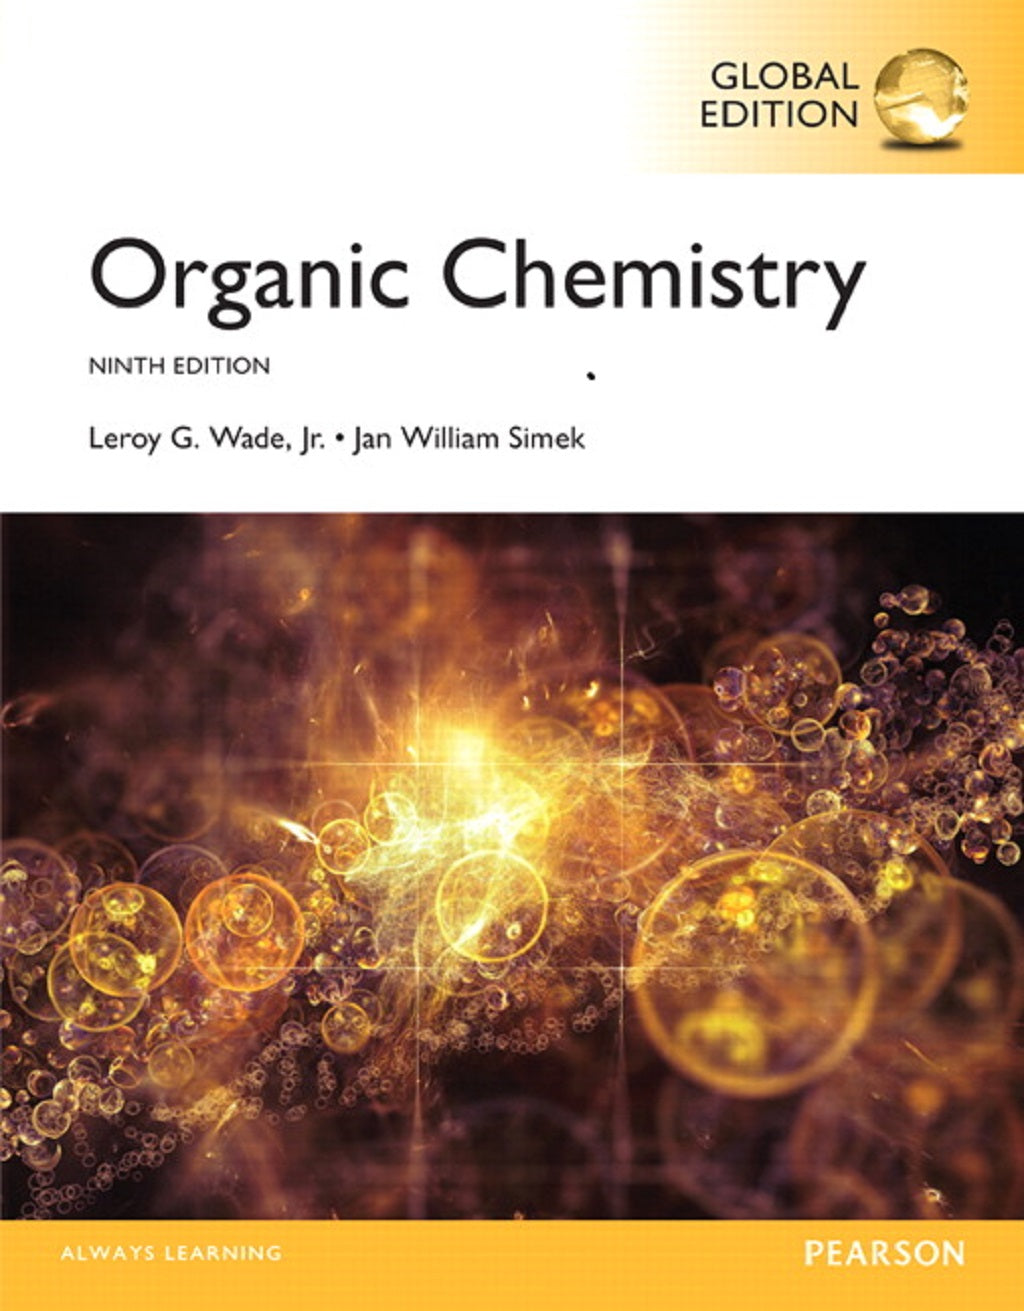 Pearson　Organic　Wade　Chemistry　–　9th　edition　Benelux